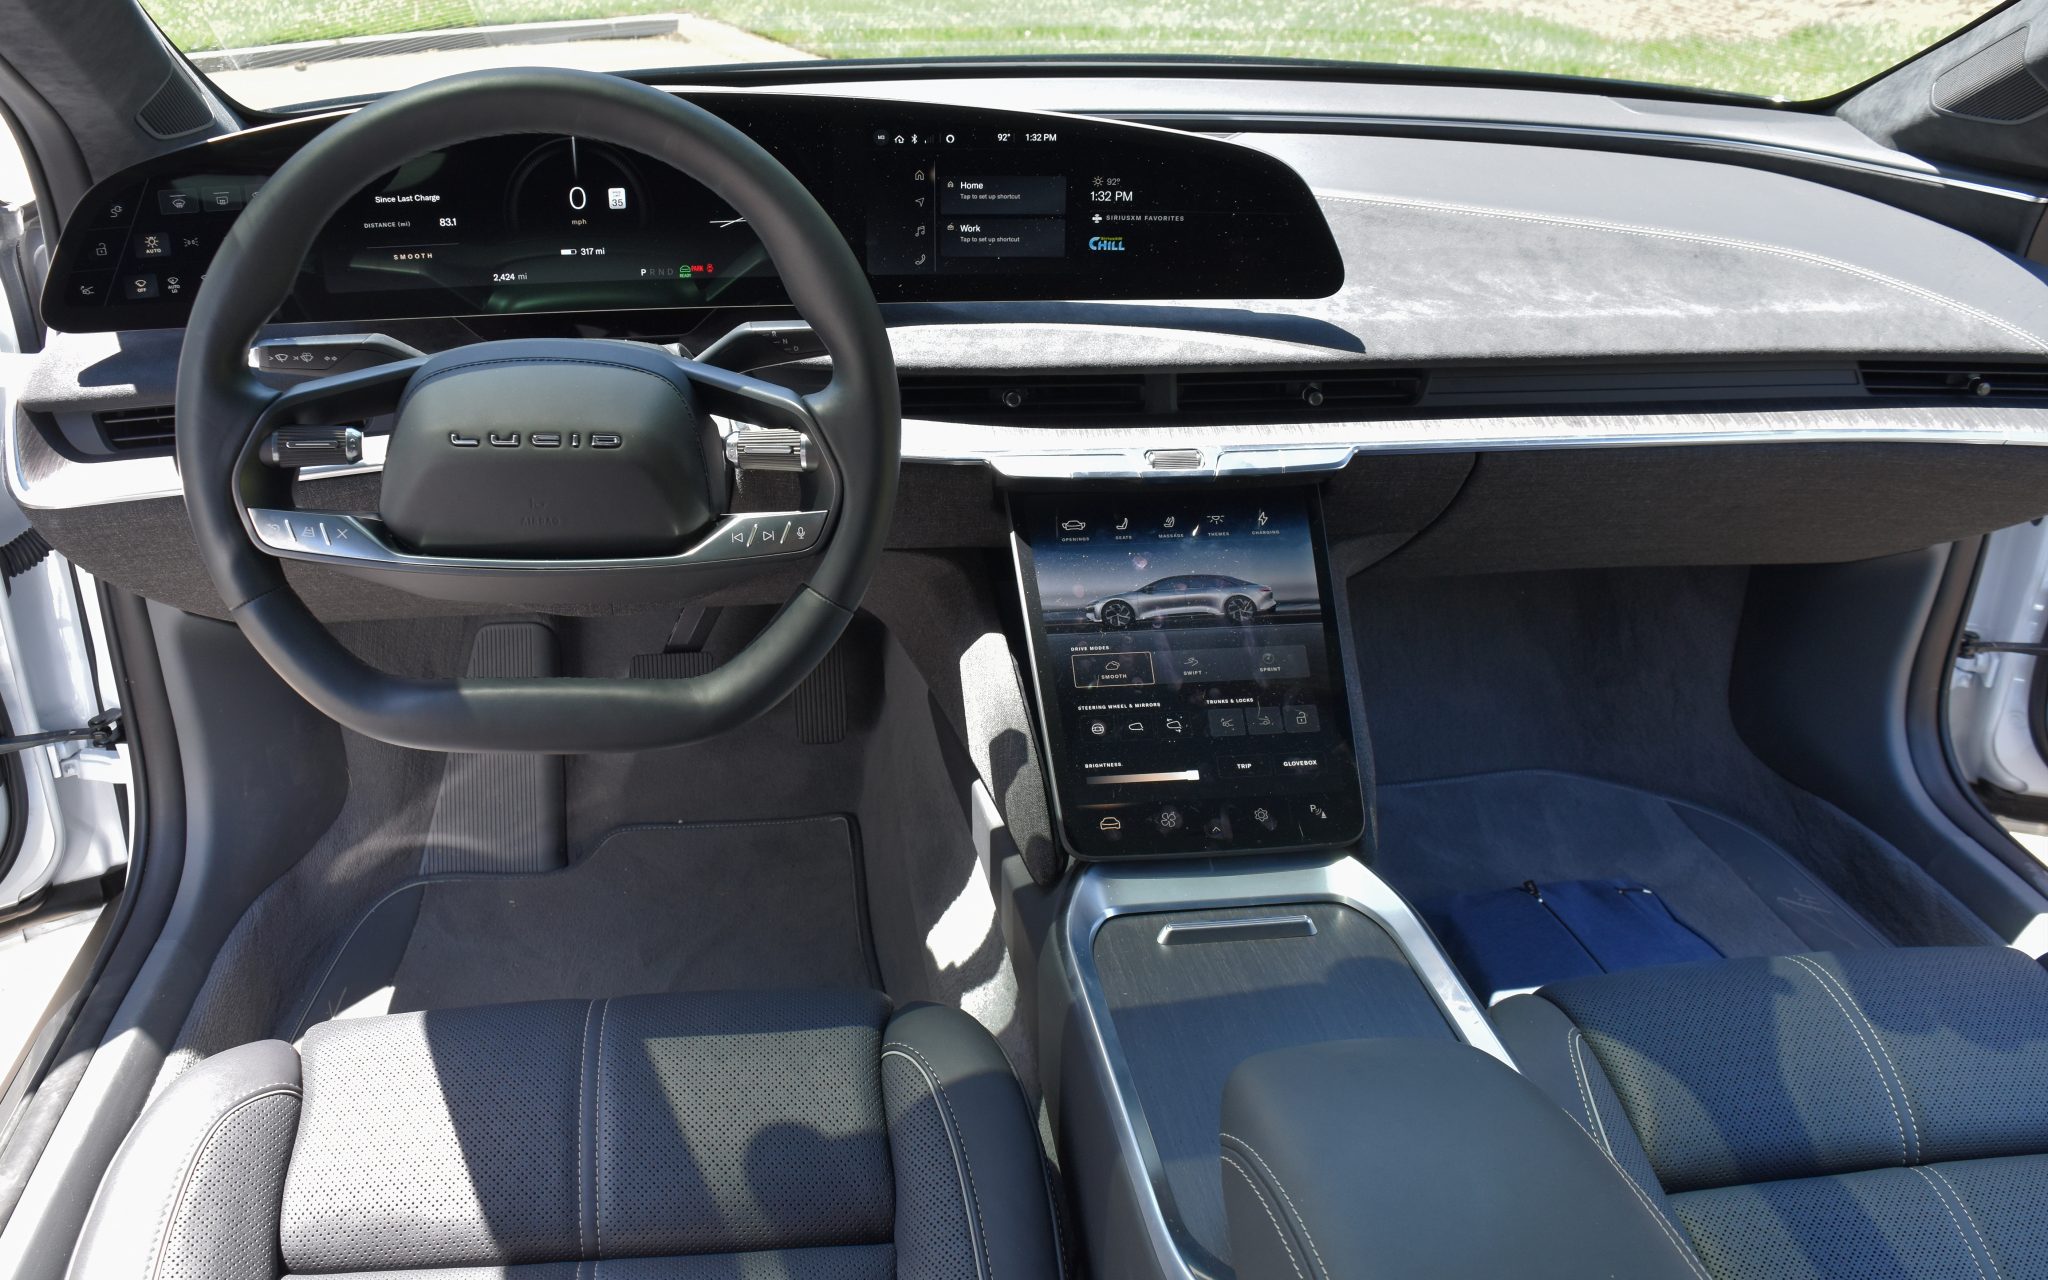 The interior of Lucid Air features Nappa leather and touchscreen functionality.